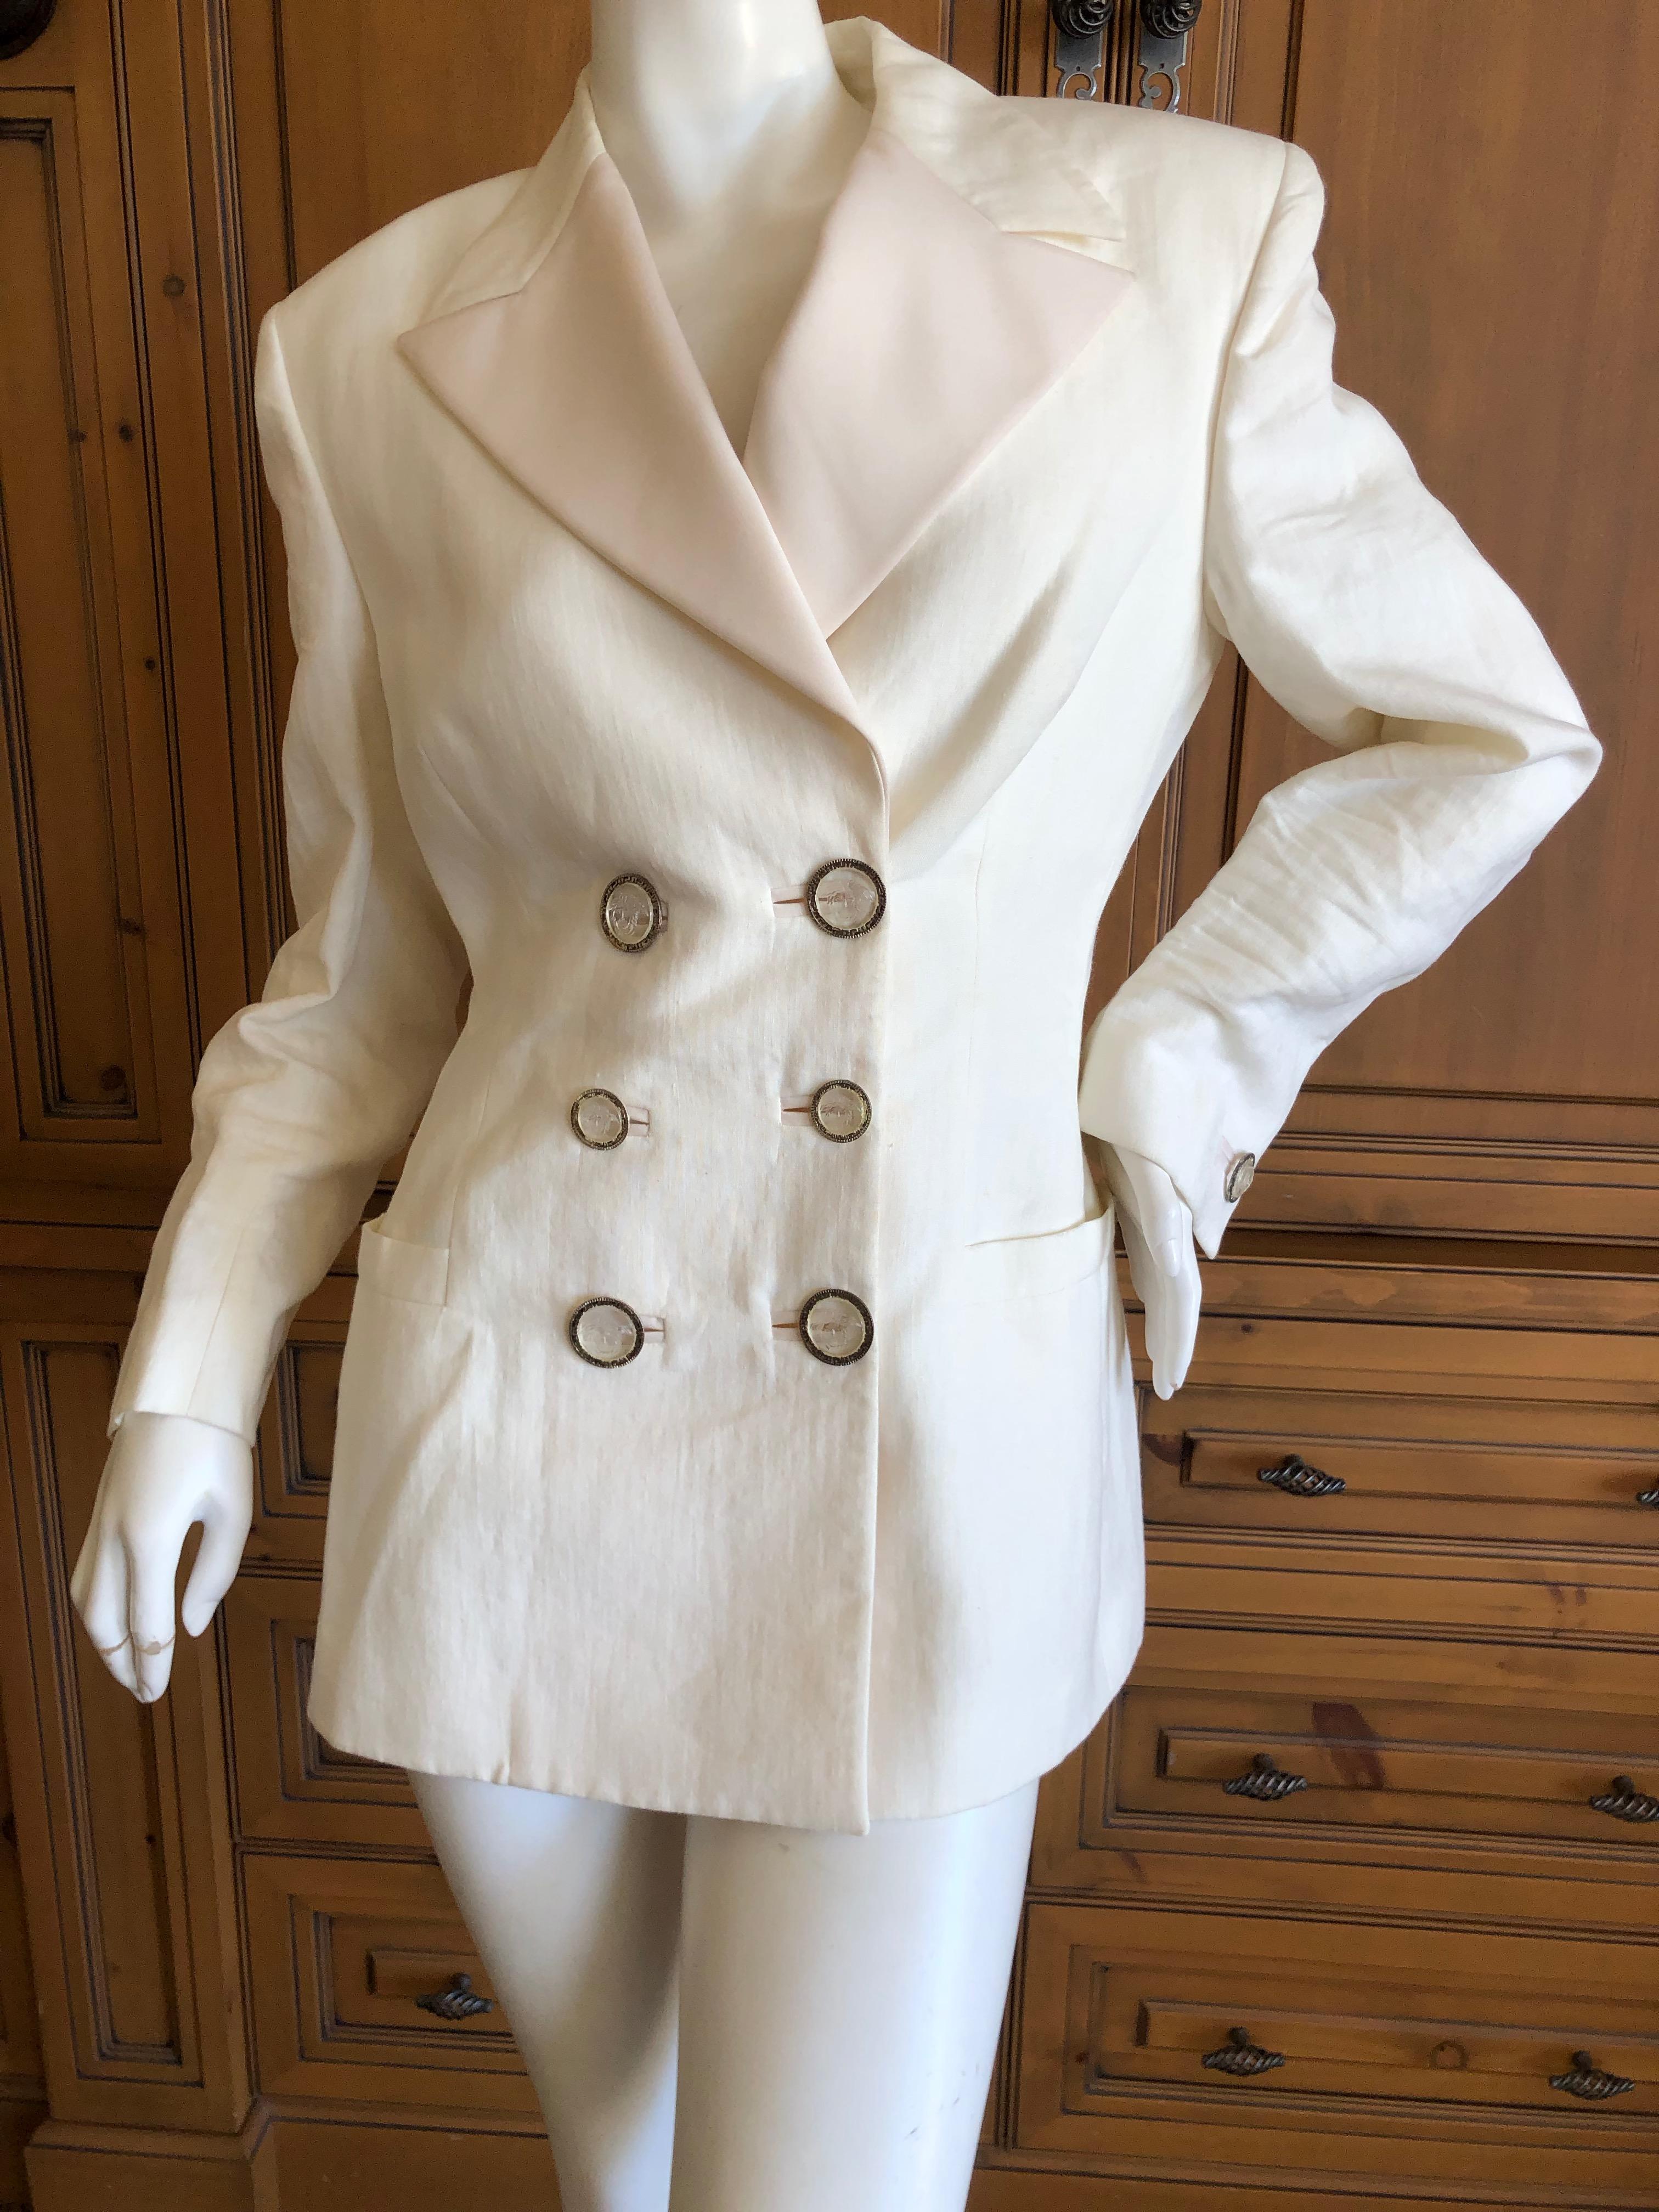 Gianni Versace Couture Fall 1992 Ivory Linen Tuxedo Suit with Corset Stay Details.
Ivory linen with silk satin lapels and stripes up the side of the shorts, this features tiny medusa headed ornaments that look like corset stays up the back.
Size